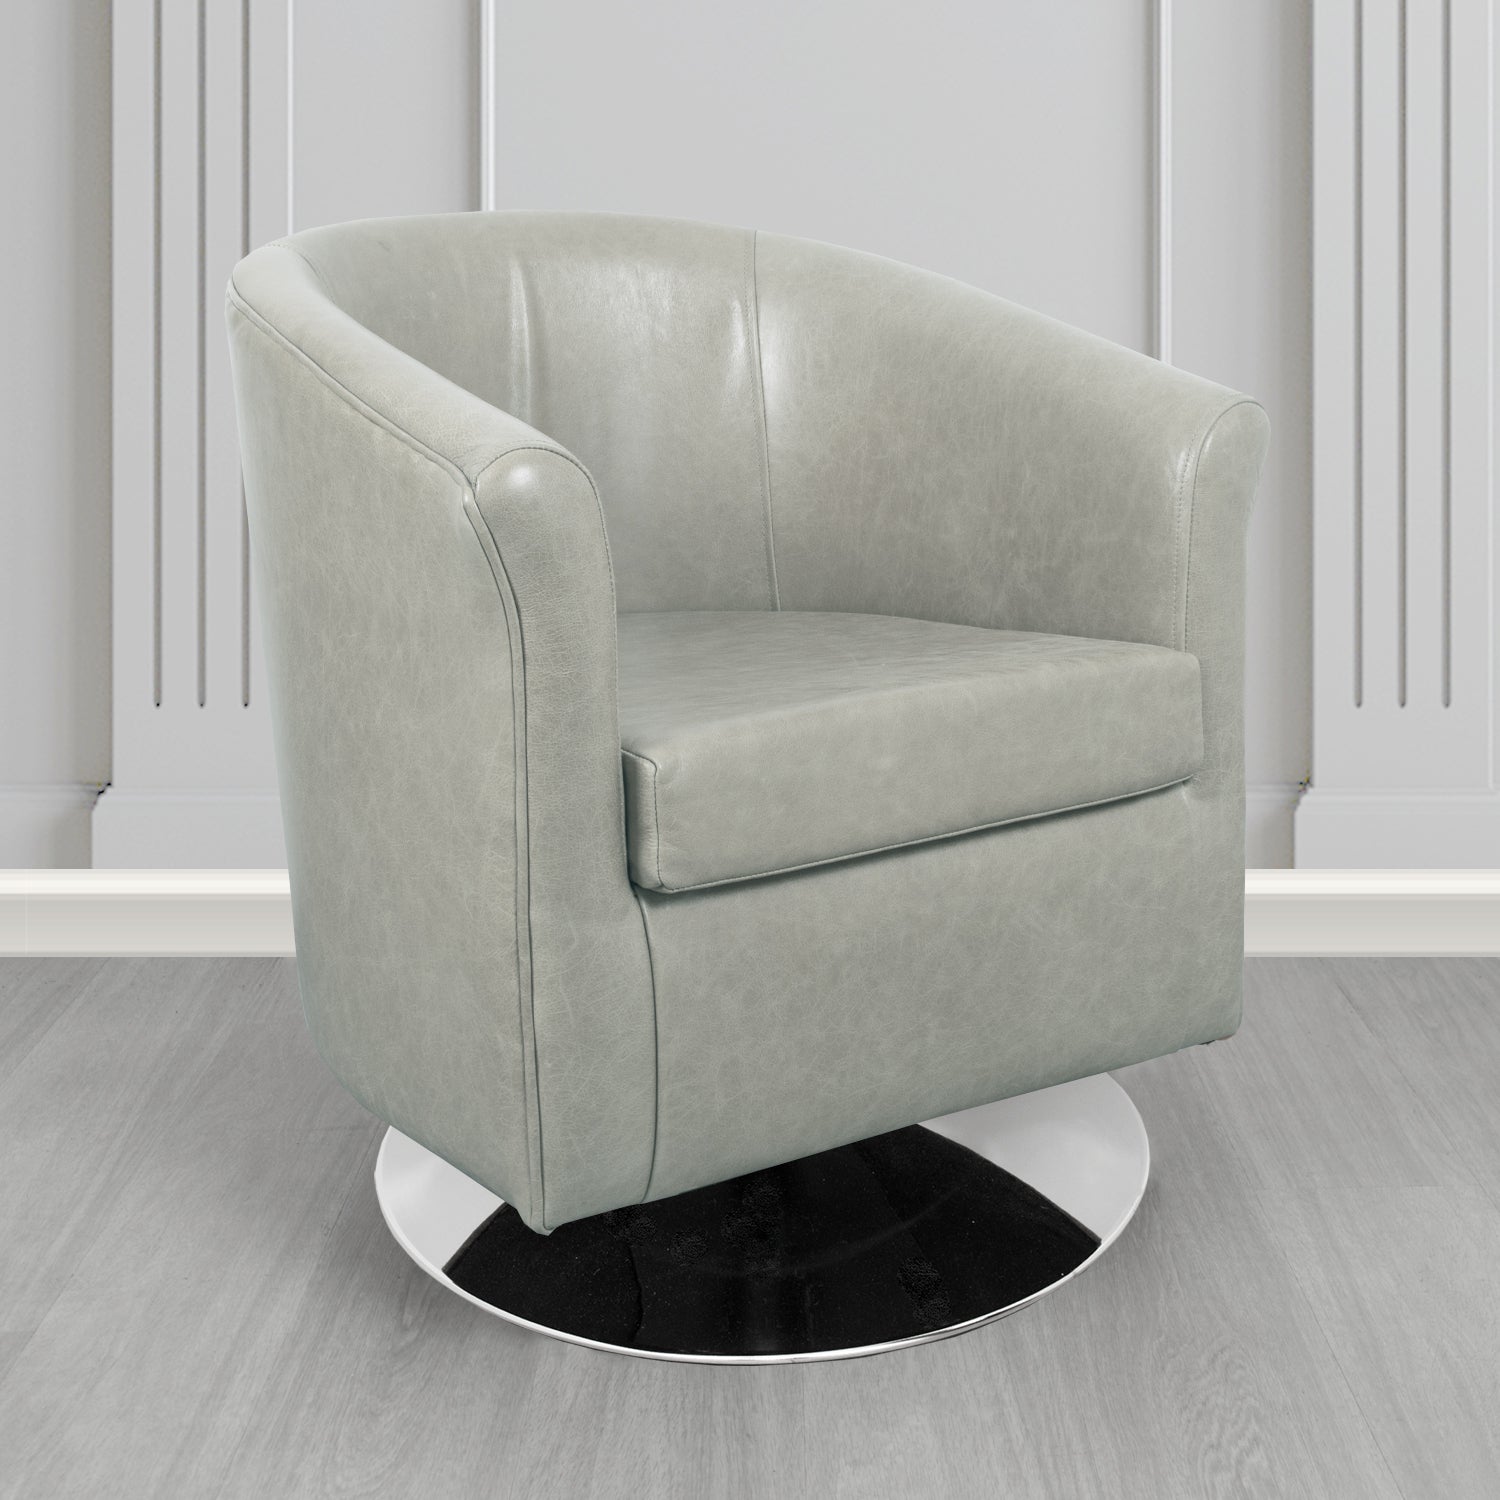 Tuscany Swivel Tub Chair in Crib 5 Old English Fossil Grey Genuine Leather - The Tub Chair Shop